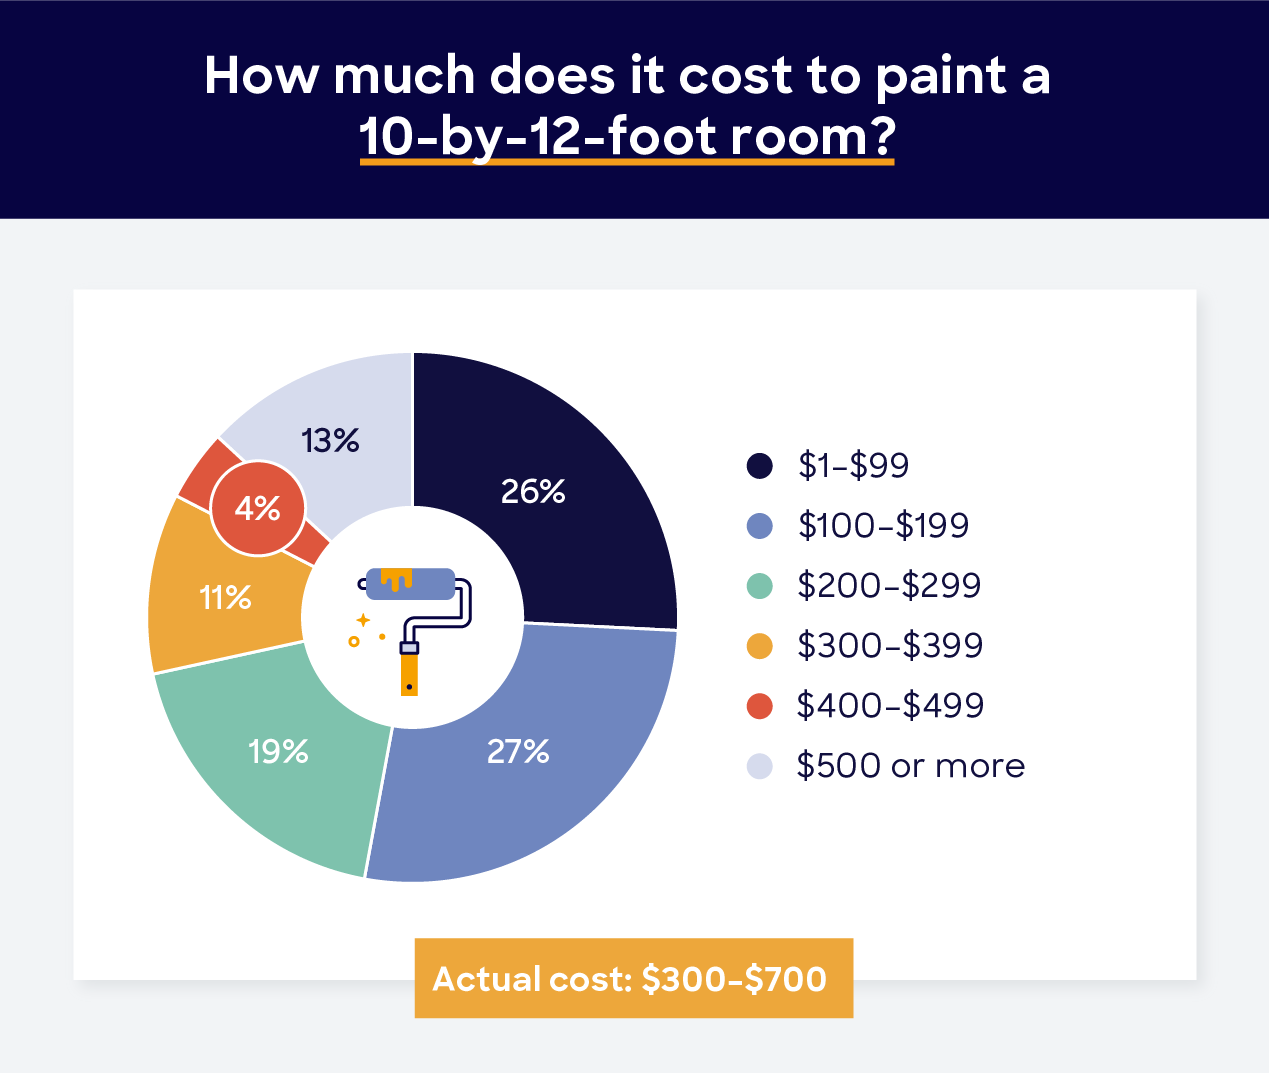 It costs between $300-$700 to paint a 10-by-12-foot room. 